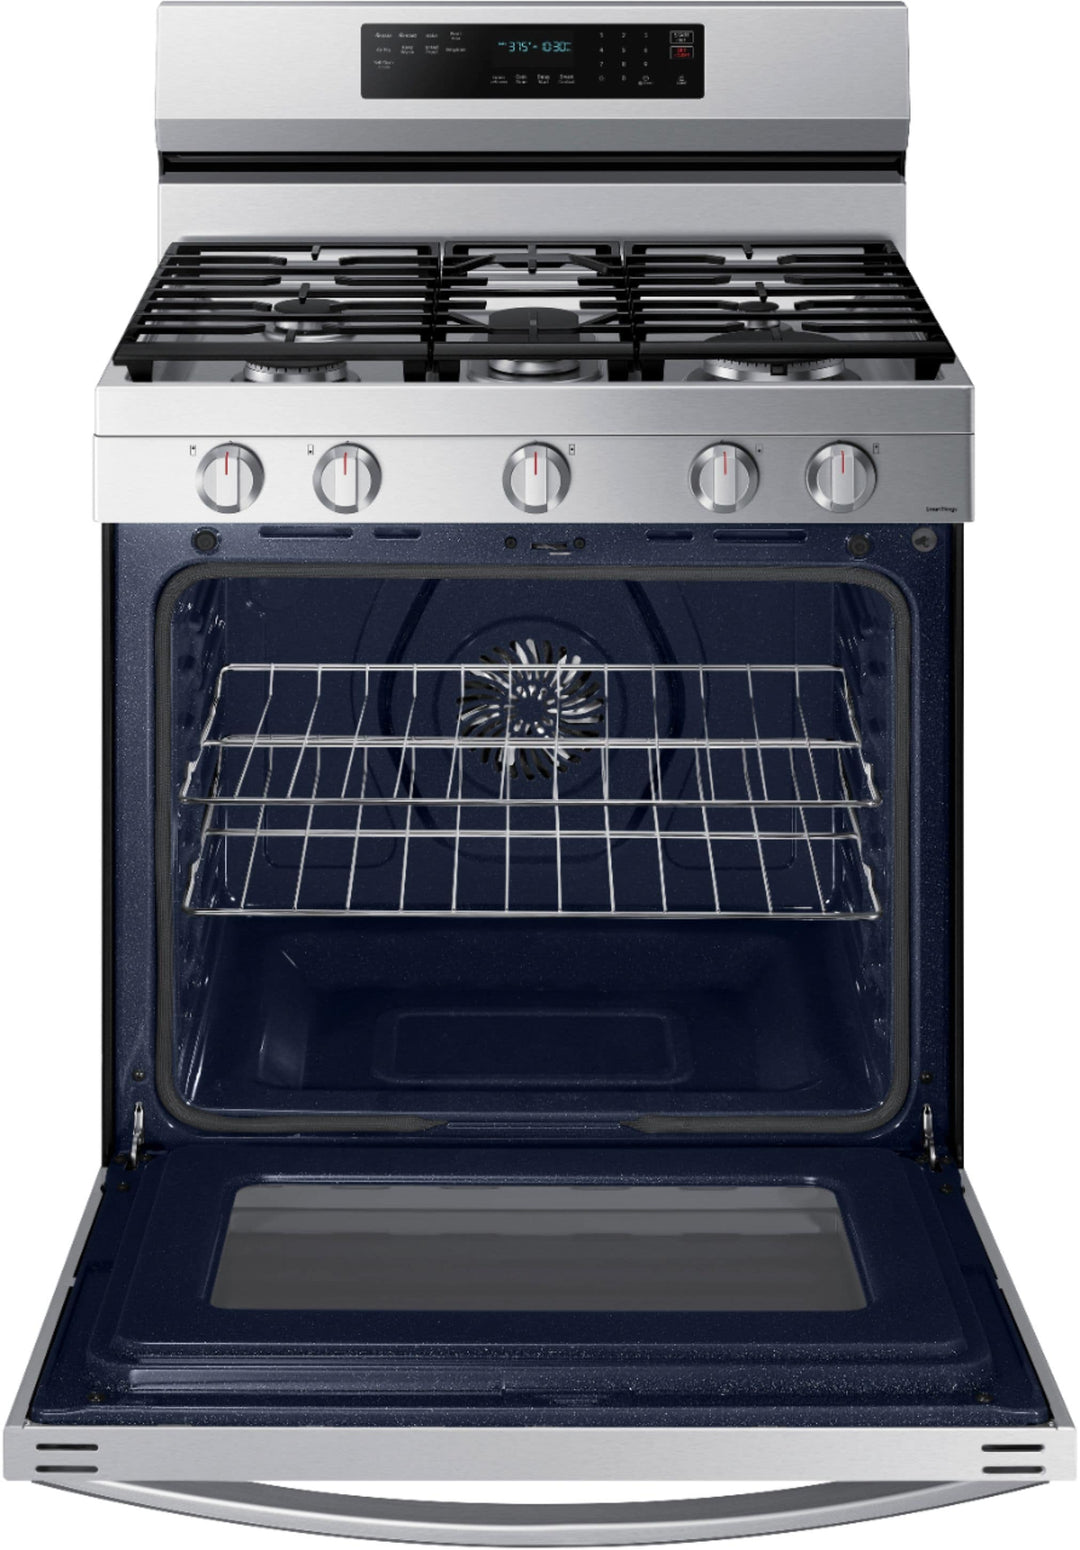 Samsung - 6.0 Cu. Ft. Freestanding Gas Convection+ Range with WiFi and No-Preheat Air Fry - Stainless steel_5